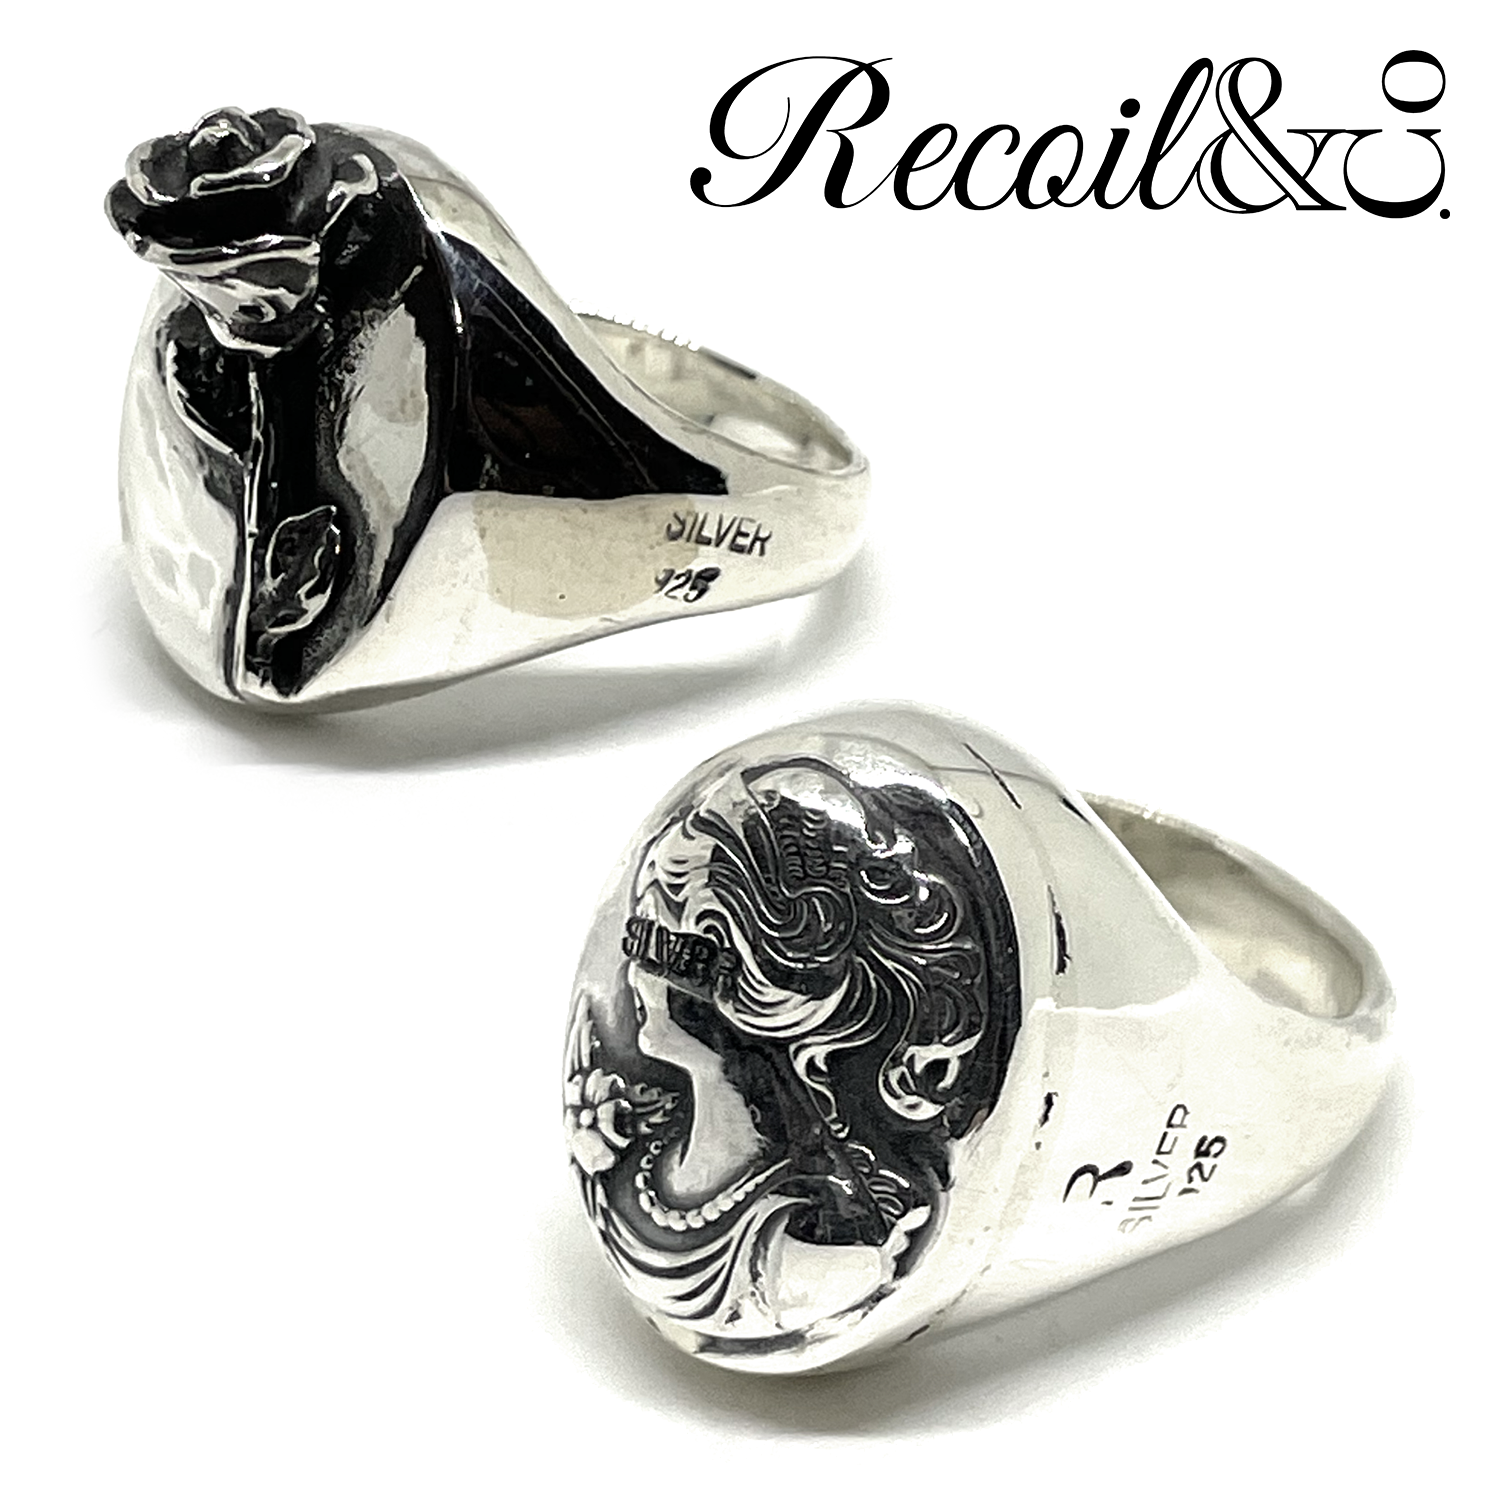 “Recoil”&co.  新作リング & KMRii新作小物が入荷致しました！